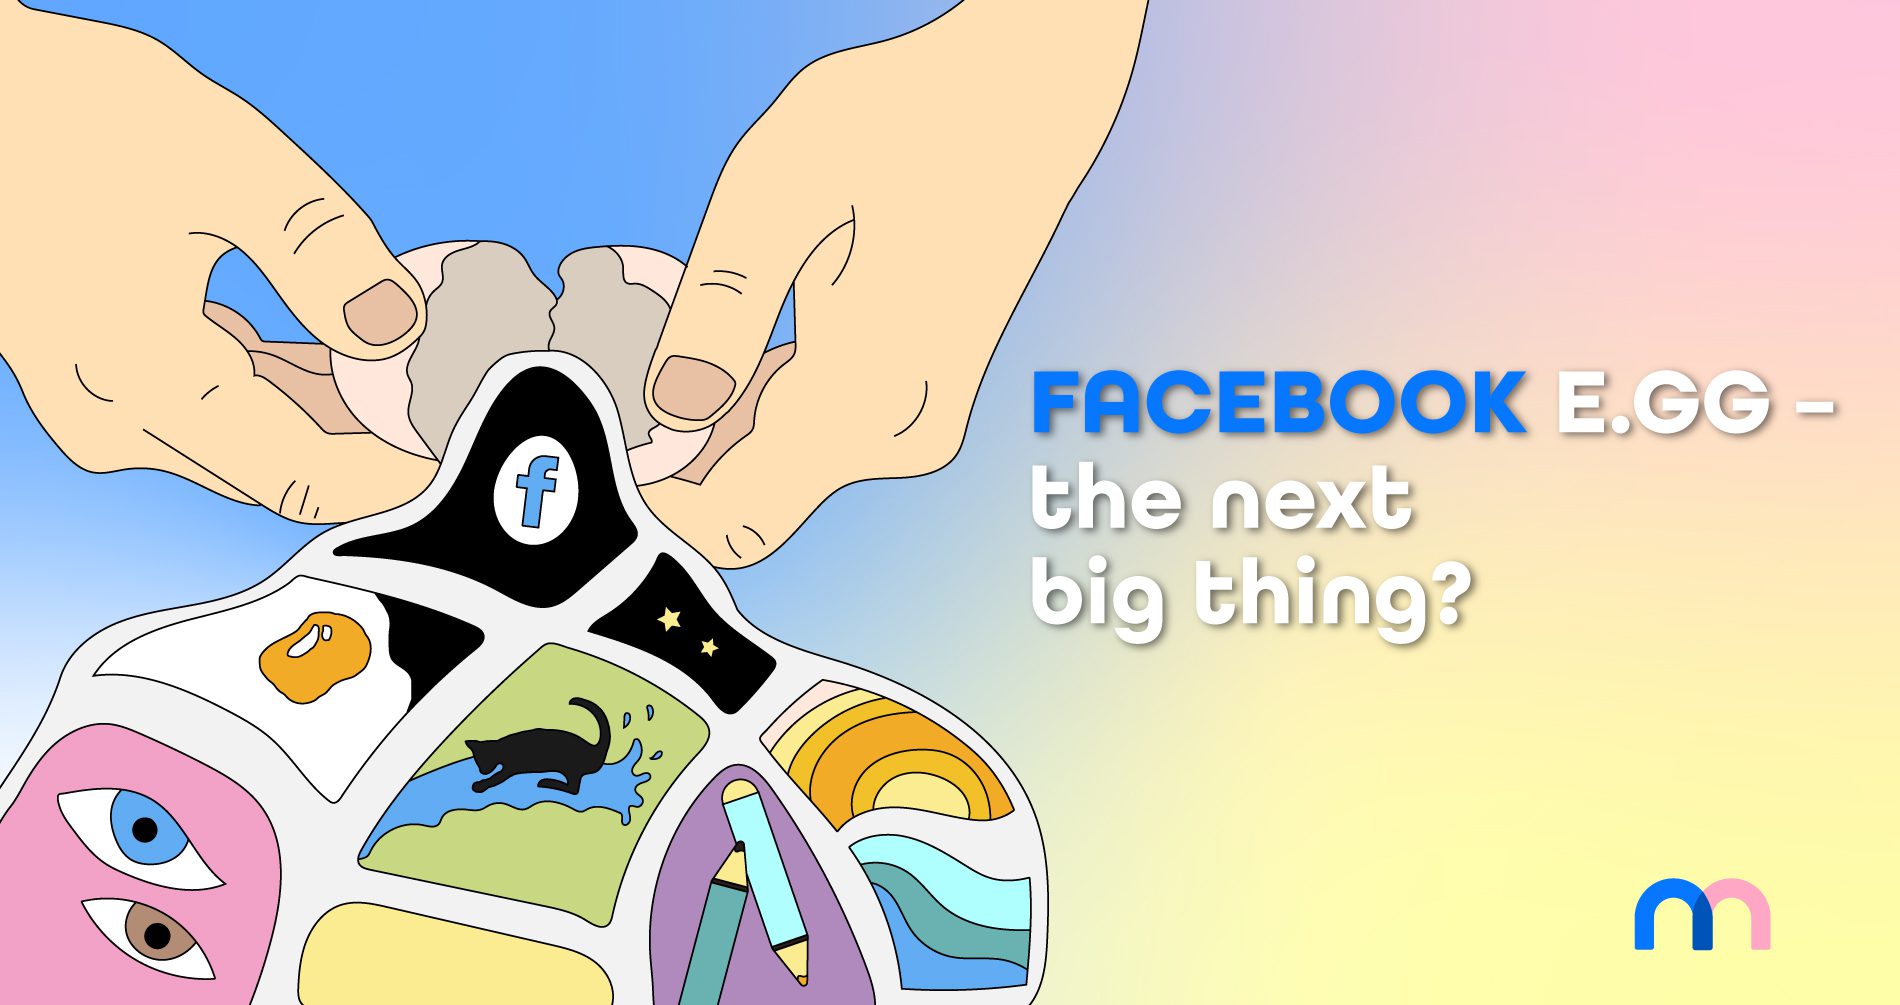 facebook-egg-the-next-big-thing-cover-design